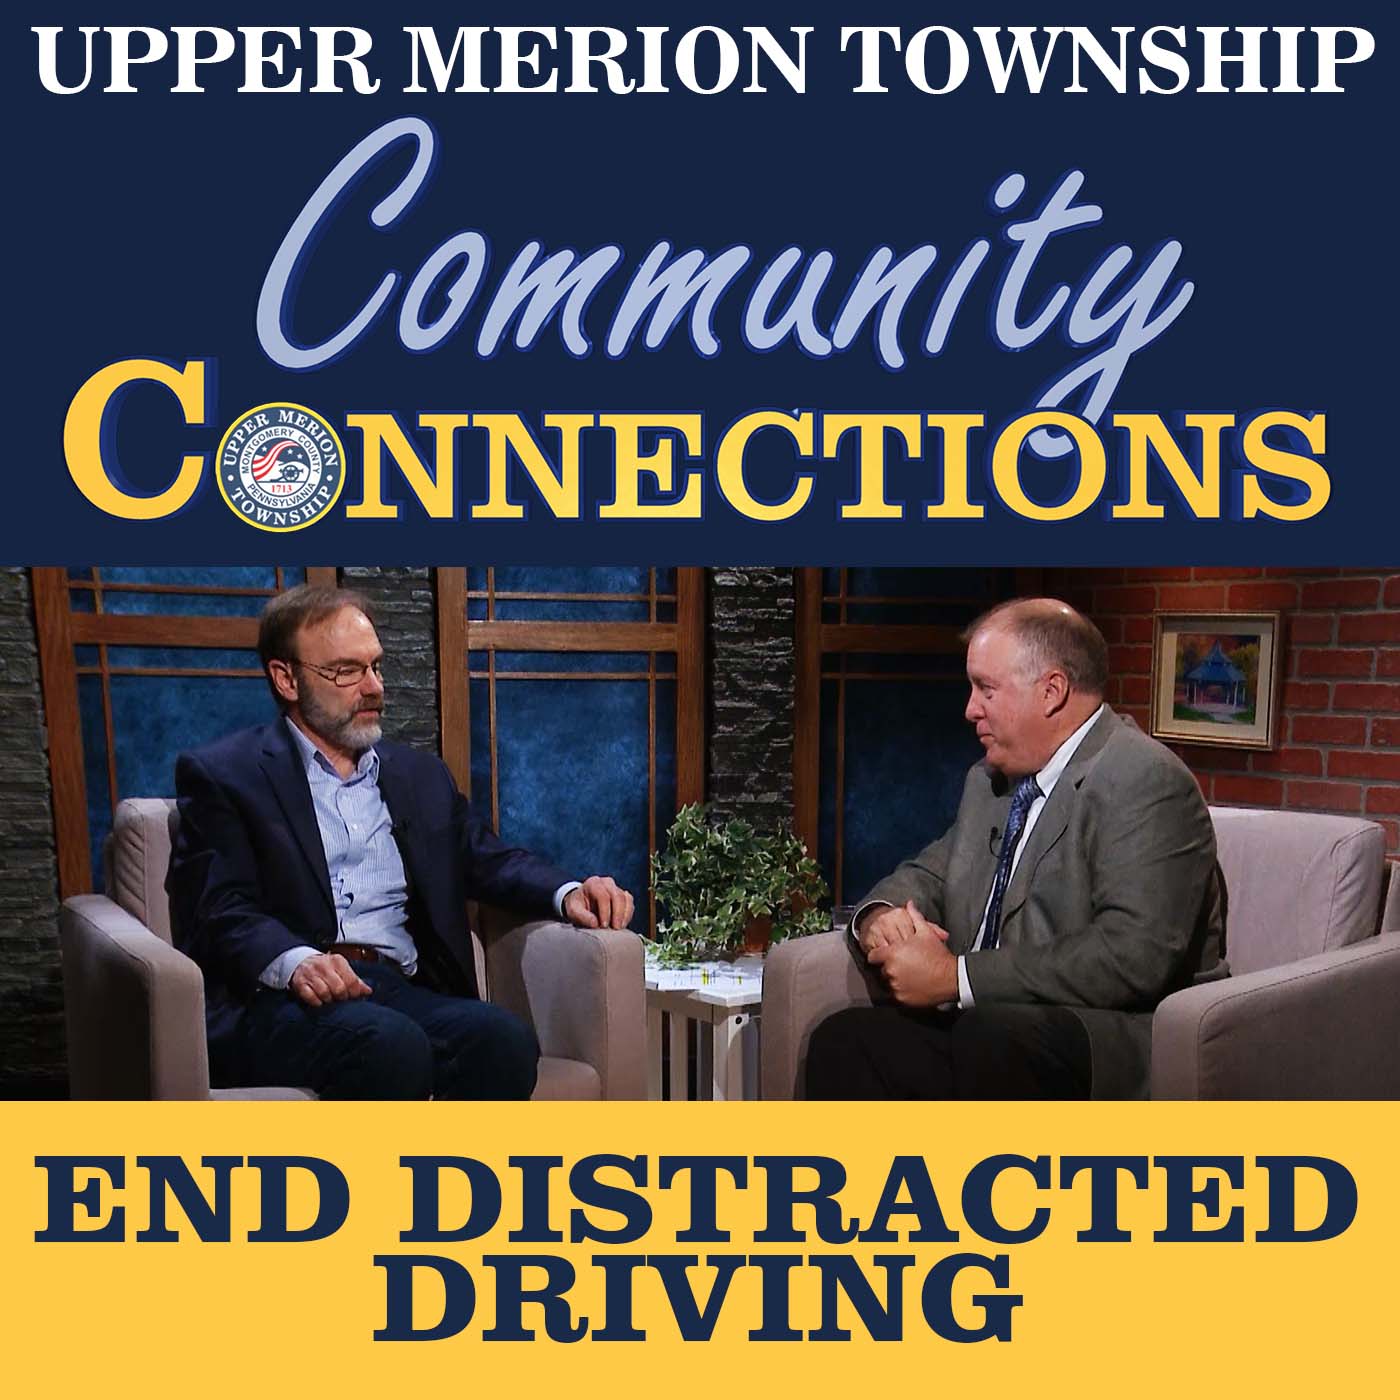 End Distracted Driving